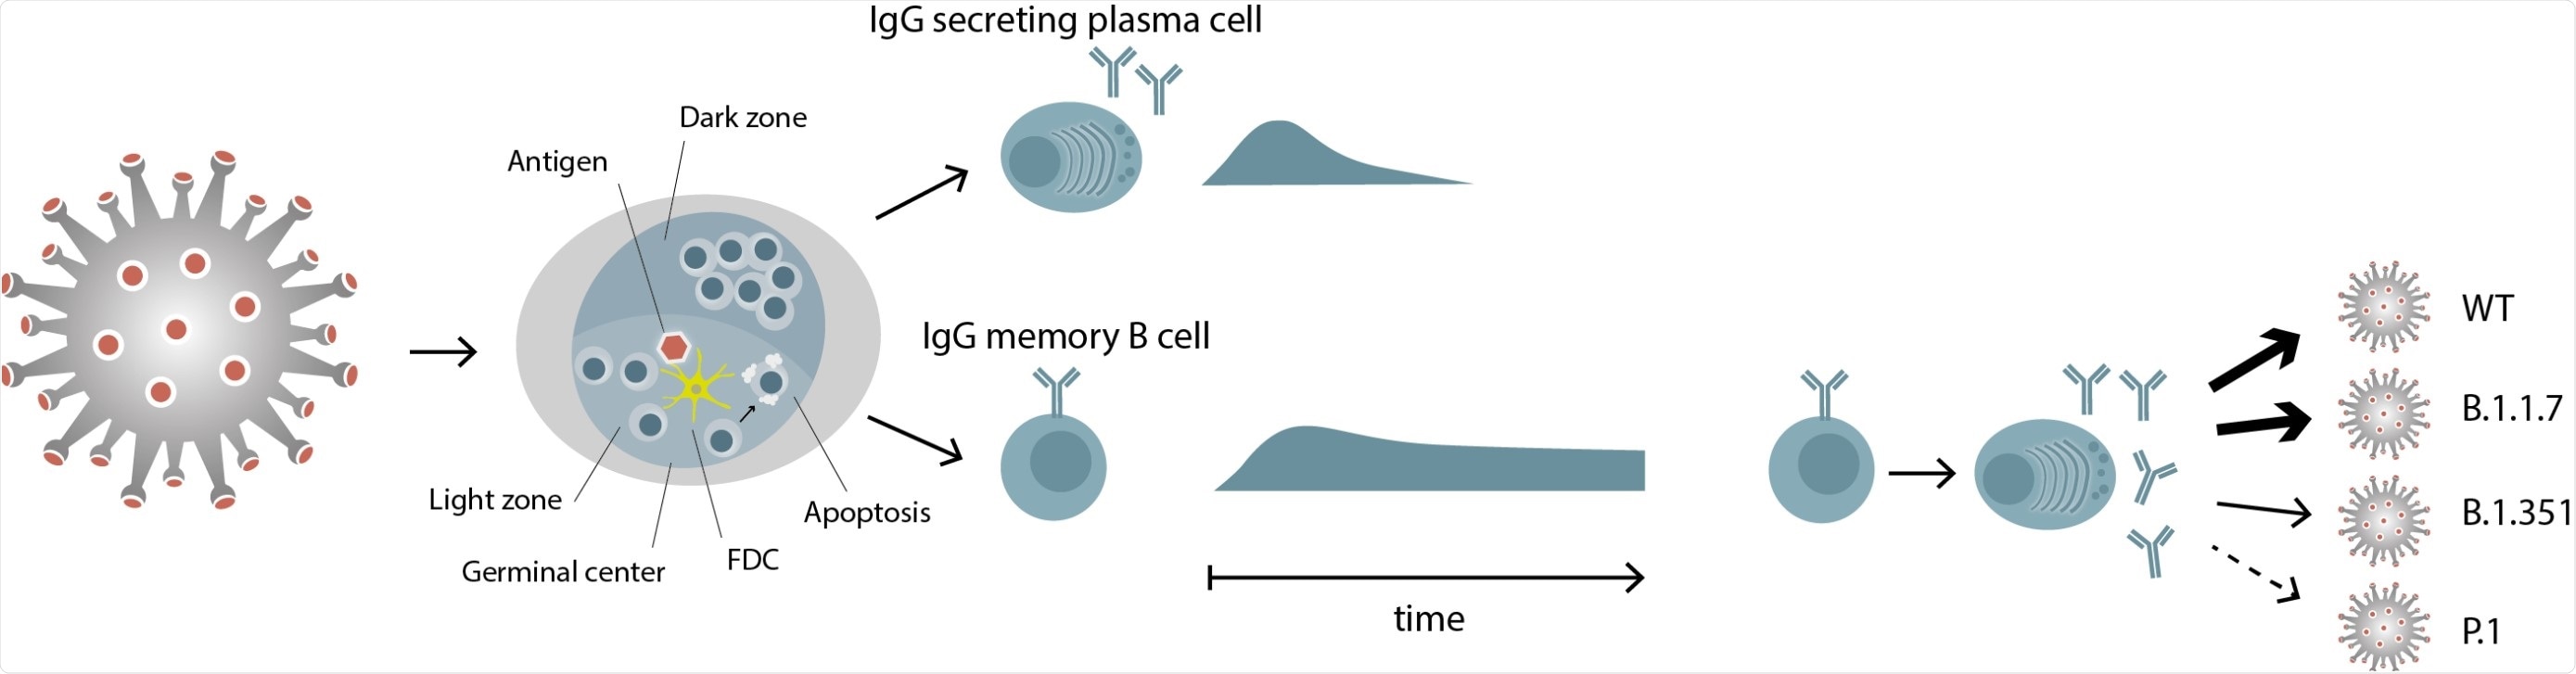 Differential persistence of IgG plasma cells and memory B cells specific for SARSCoV- 2 SARS-CoV-2 antigen is transported to the lymph nodes, where it induces a germinal center reaction with the activation and differentiation of specific B cells. Two types of immune cells exit the germinal center, IgG secreting plasma cells and IgG memory B cells. IgG memory B cells persist, even when the corresponding plasma cells have disappeared. These memory B cells can differentiate to IgG secreting plasma cells and the IgGs they produce show a differential recognition of RBDs of viral variants.